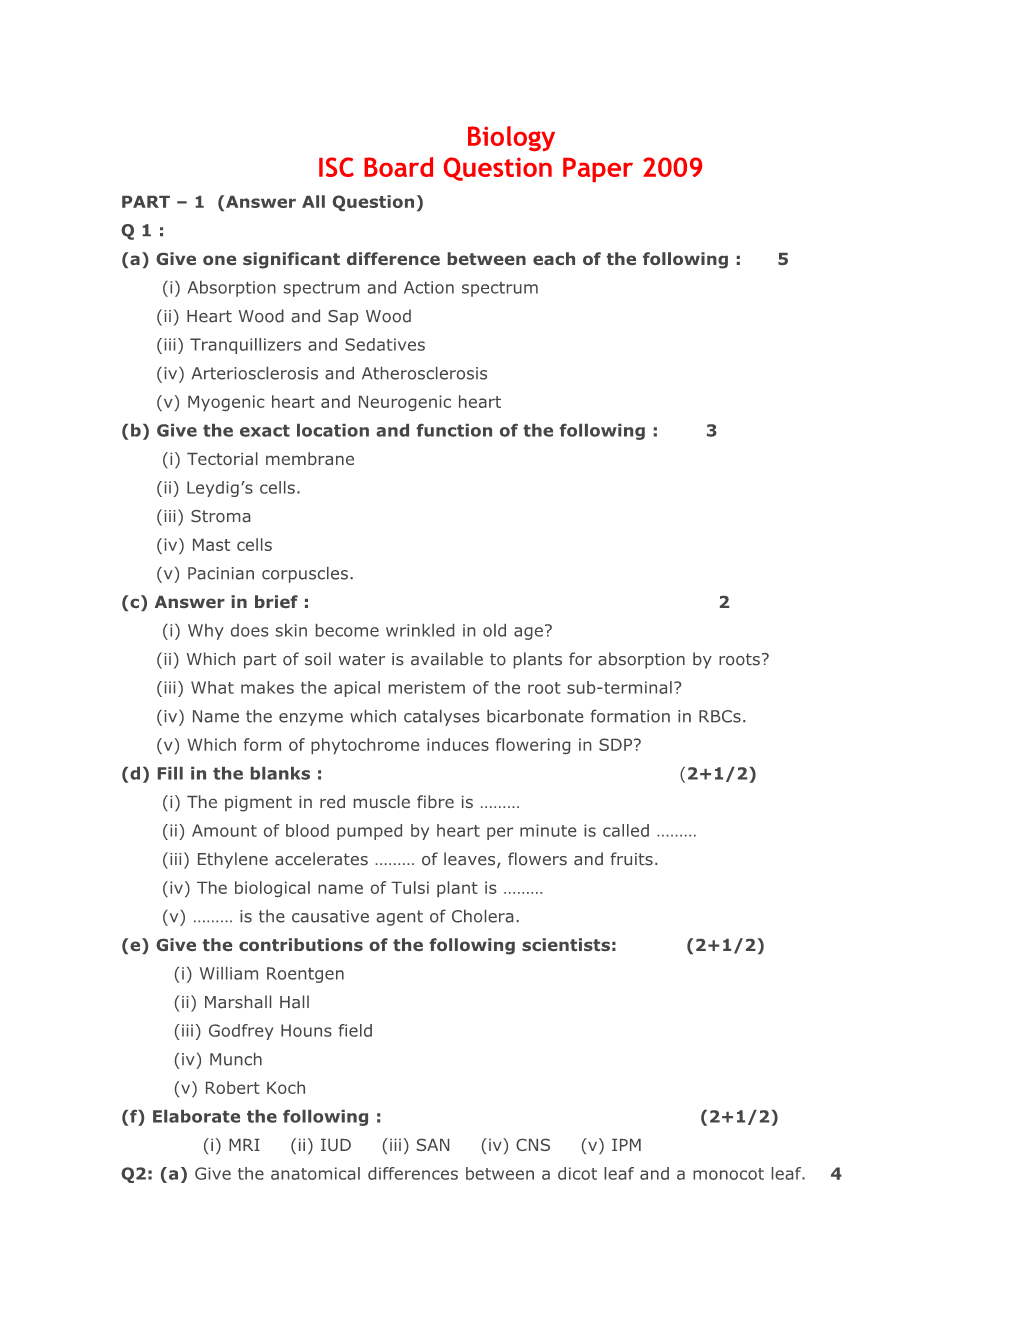 ISC Board Question Paper 2009